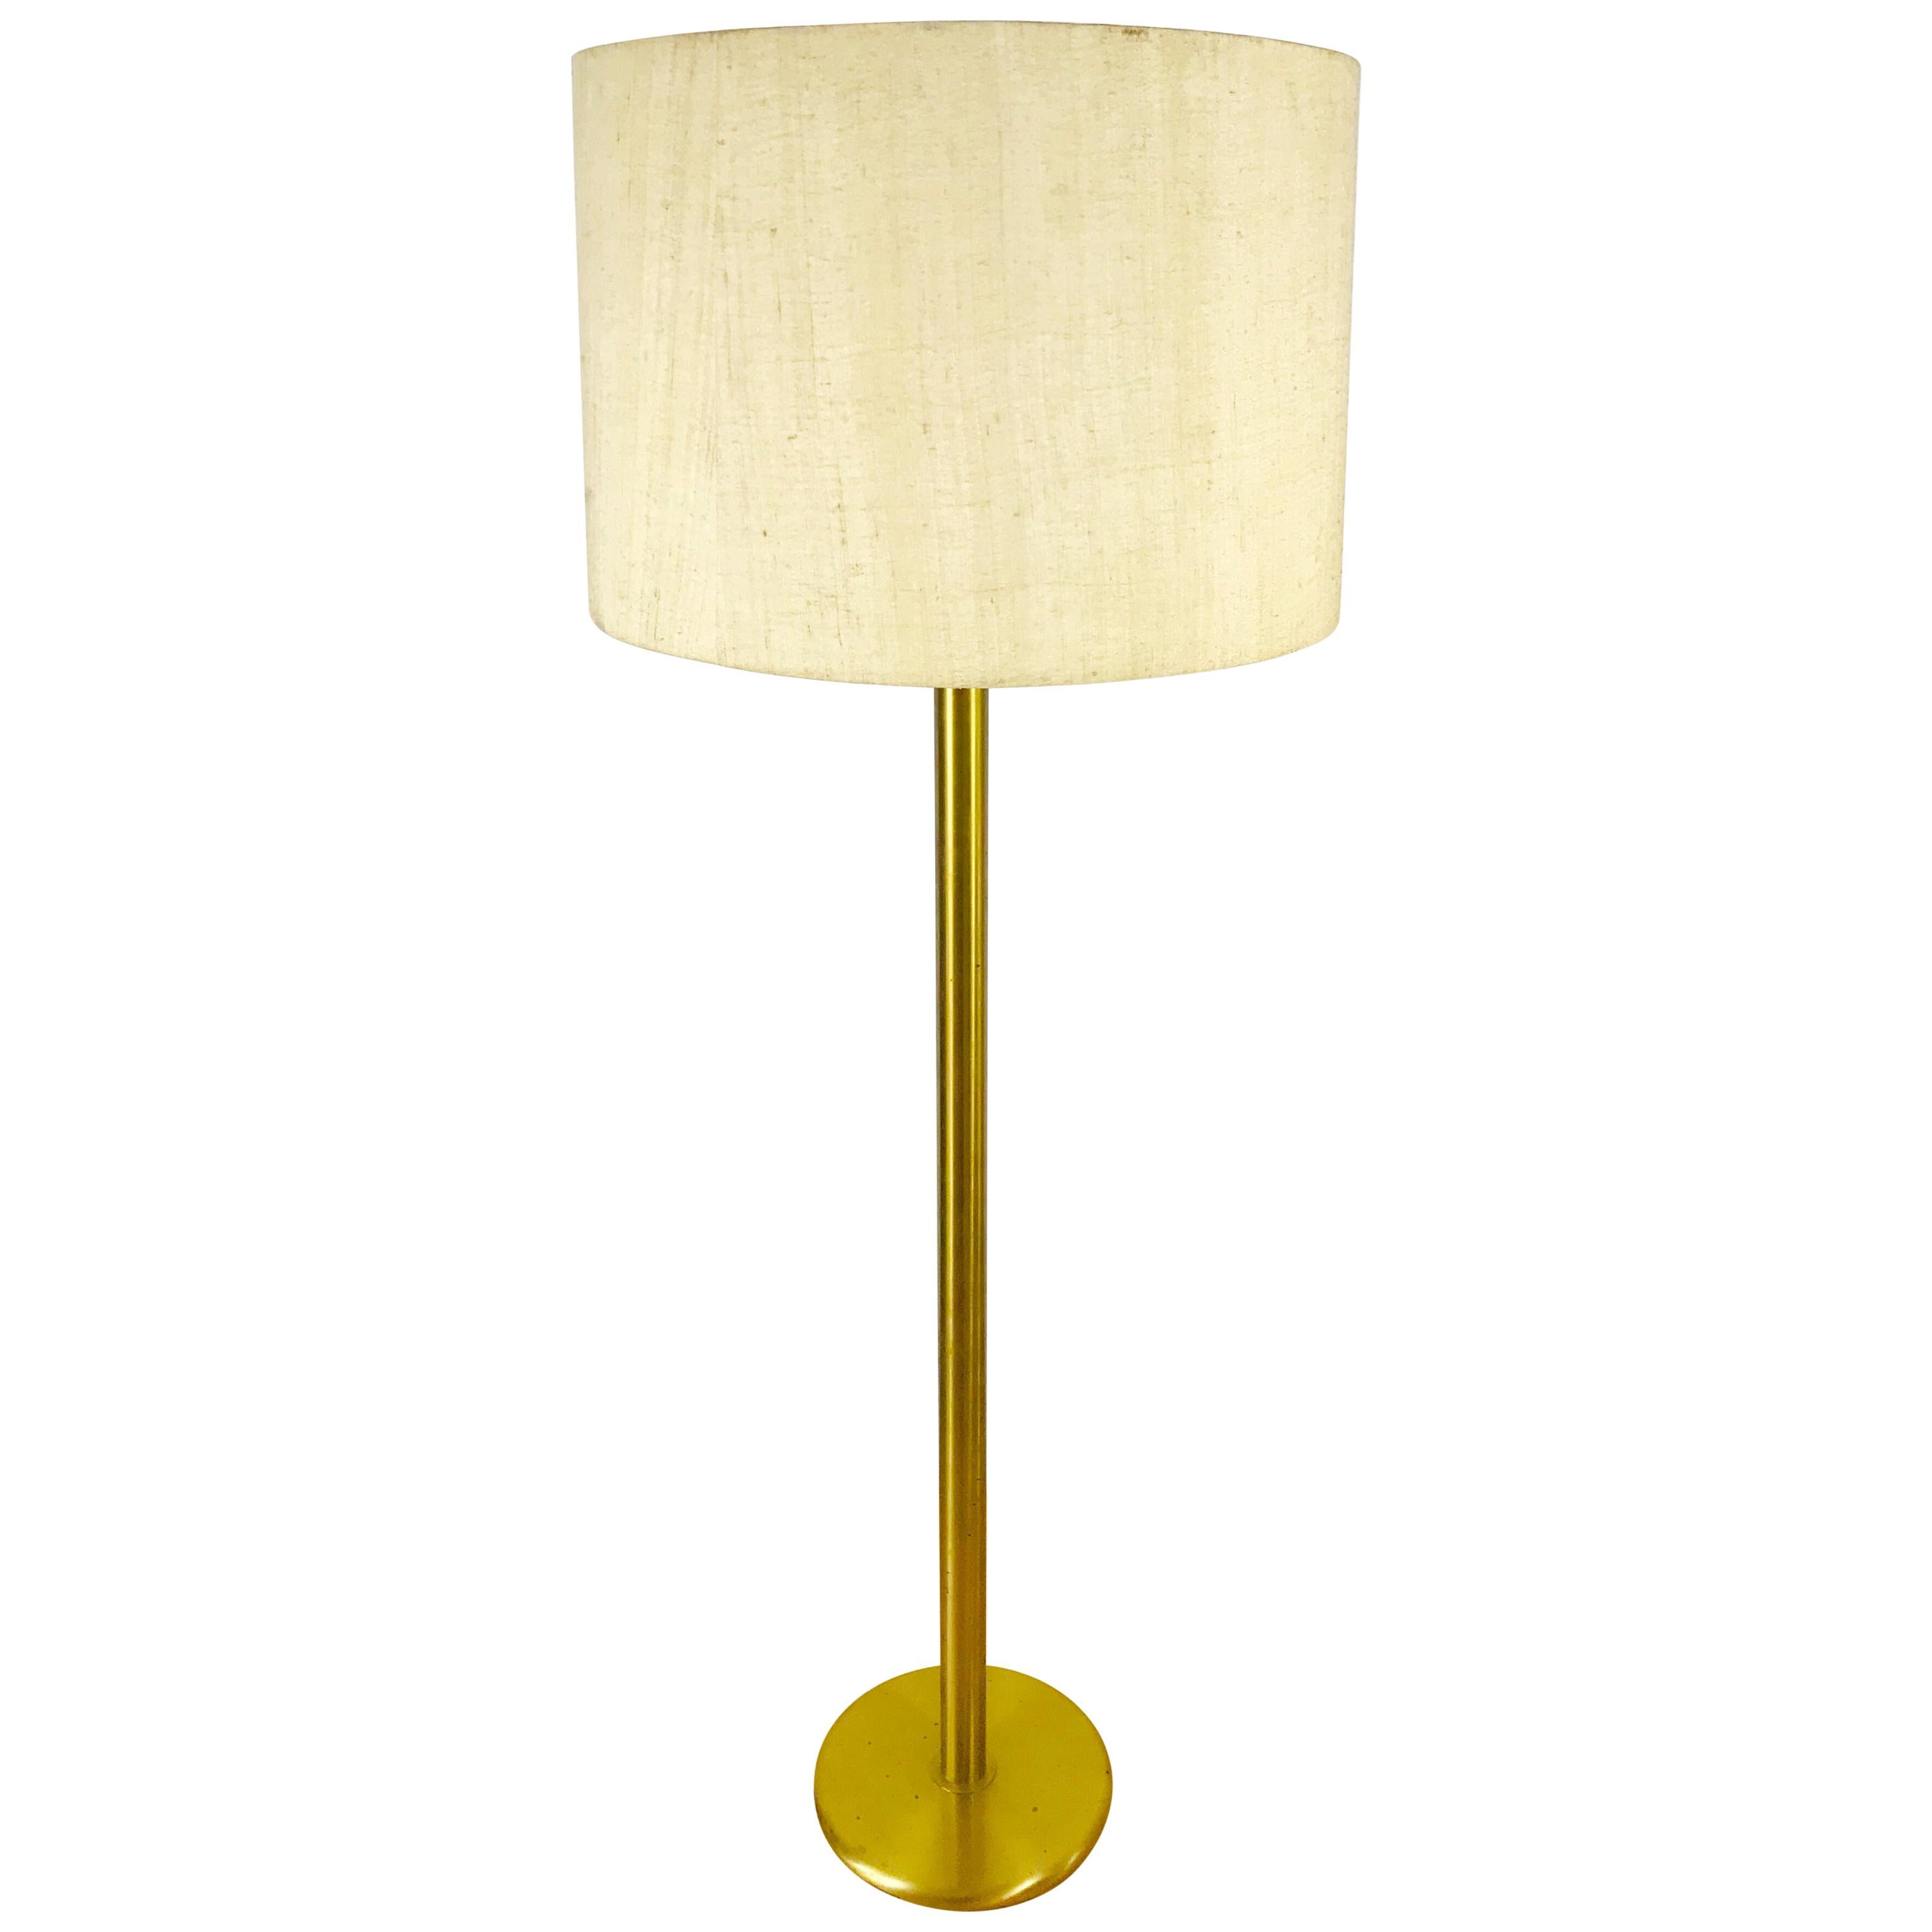 Cosack Midcentury Brass and Cloth Floor Lamp, 1960s, Germany For Sale